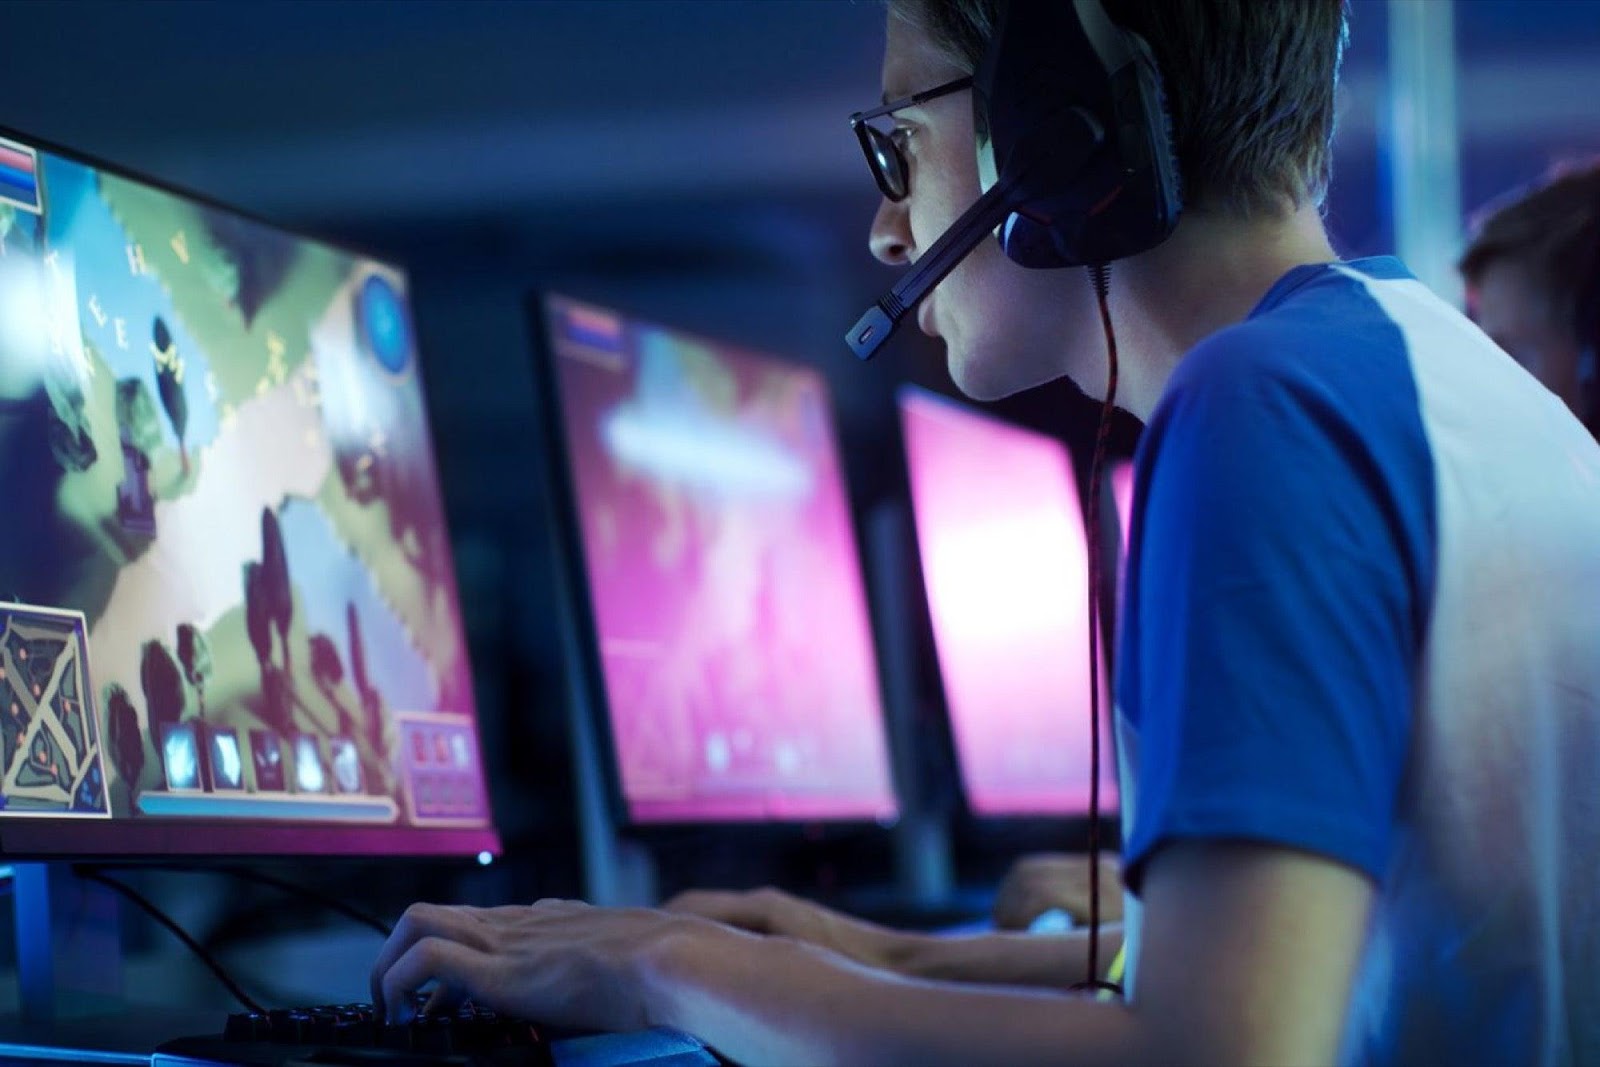 Pro Tips for Improving Your Online Gaming Performance